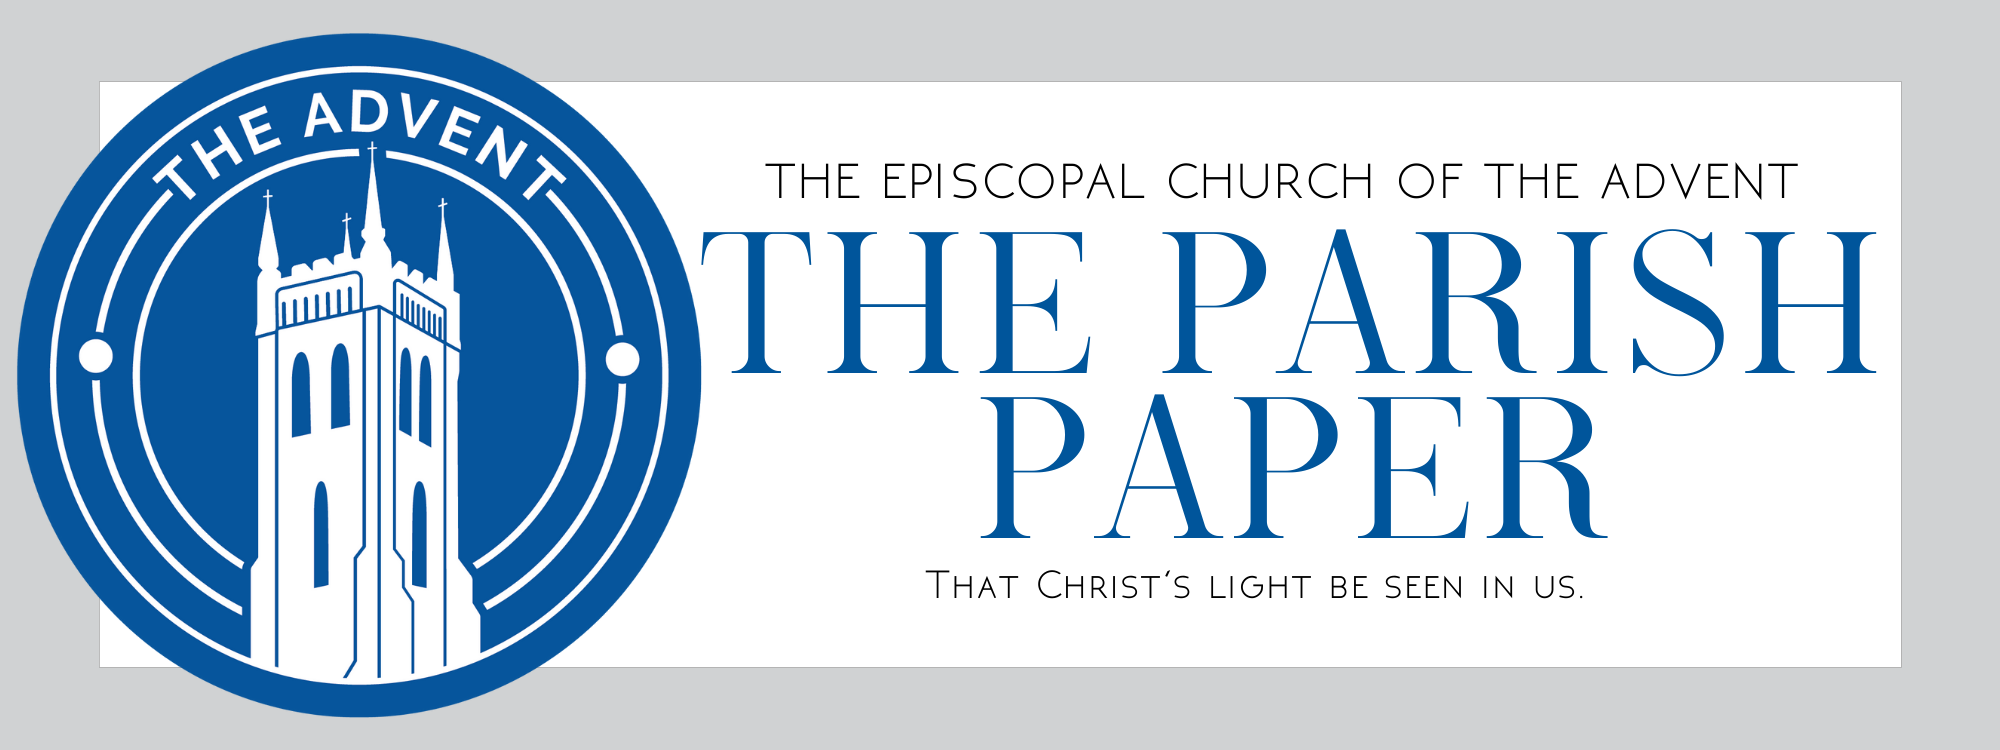 The Parish Paper – December 2021/January 2022 Issue